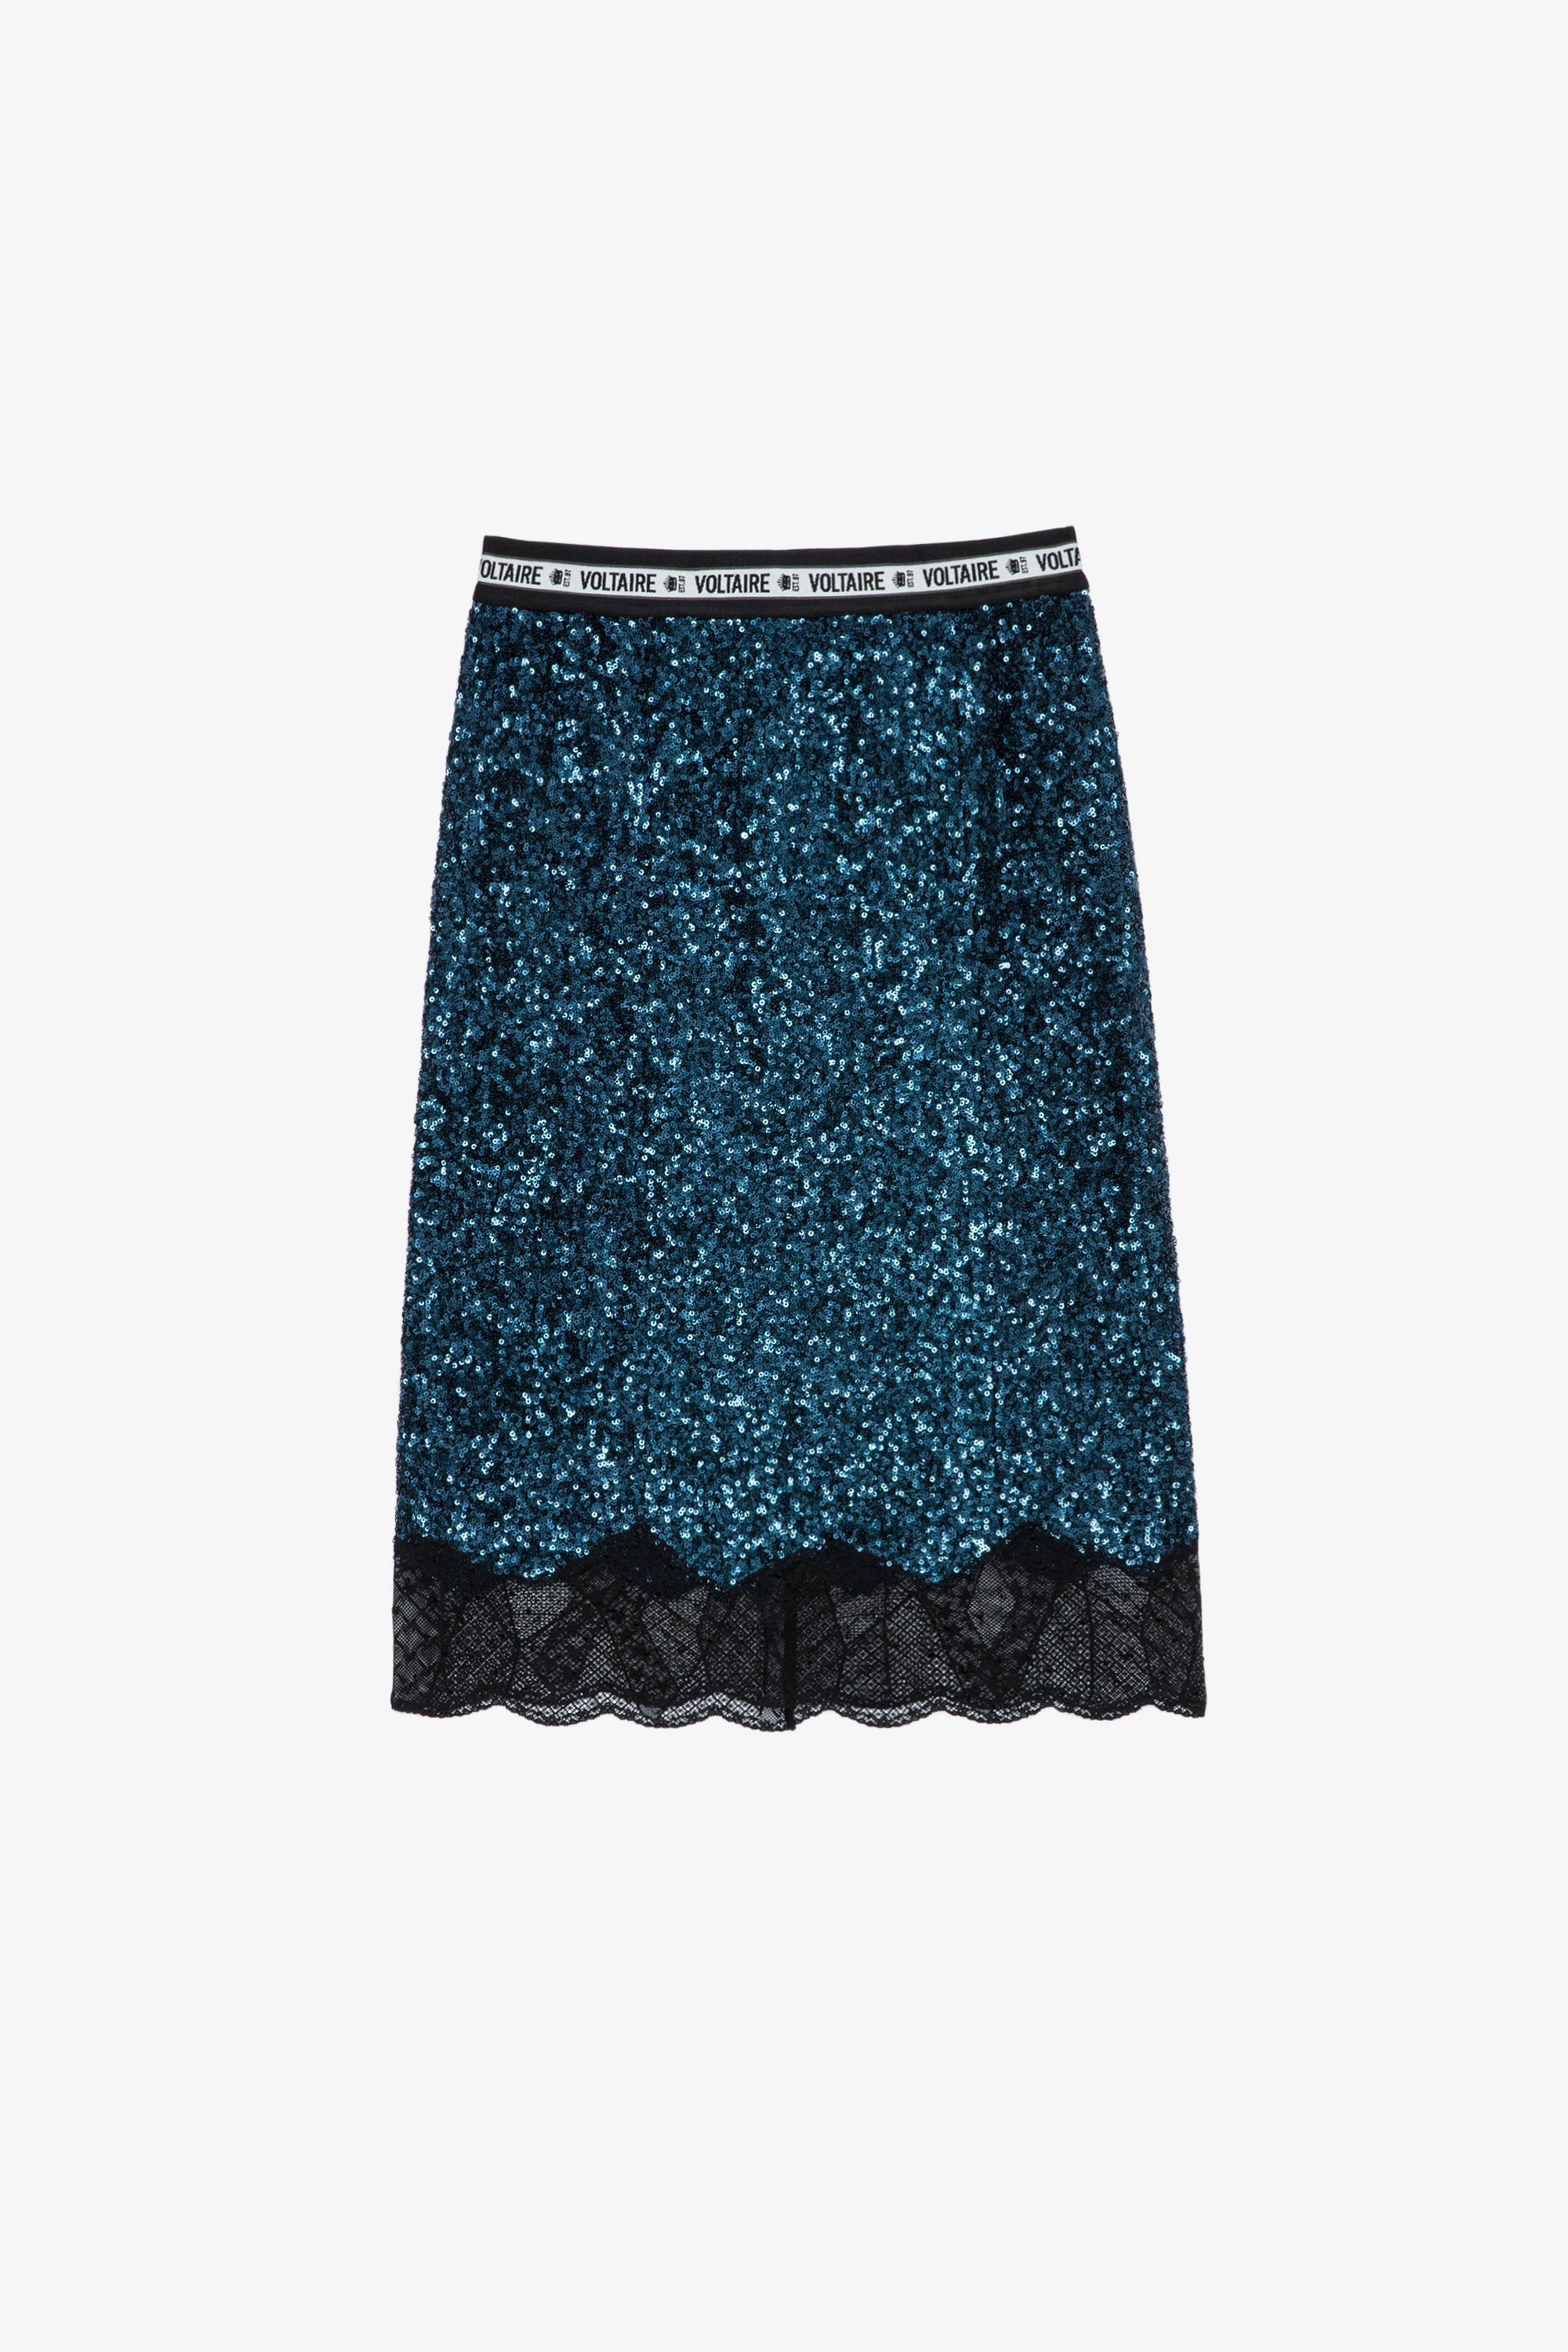 Justicia Sequins スカート Women’s midi skirt decorated with blue sequins, patterned lace trim and crystal embellishment 